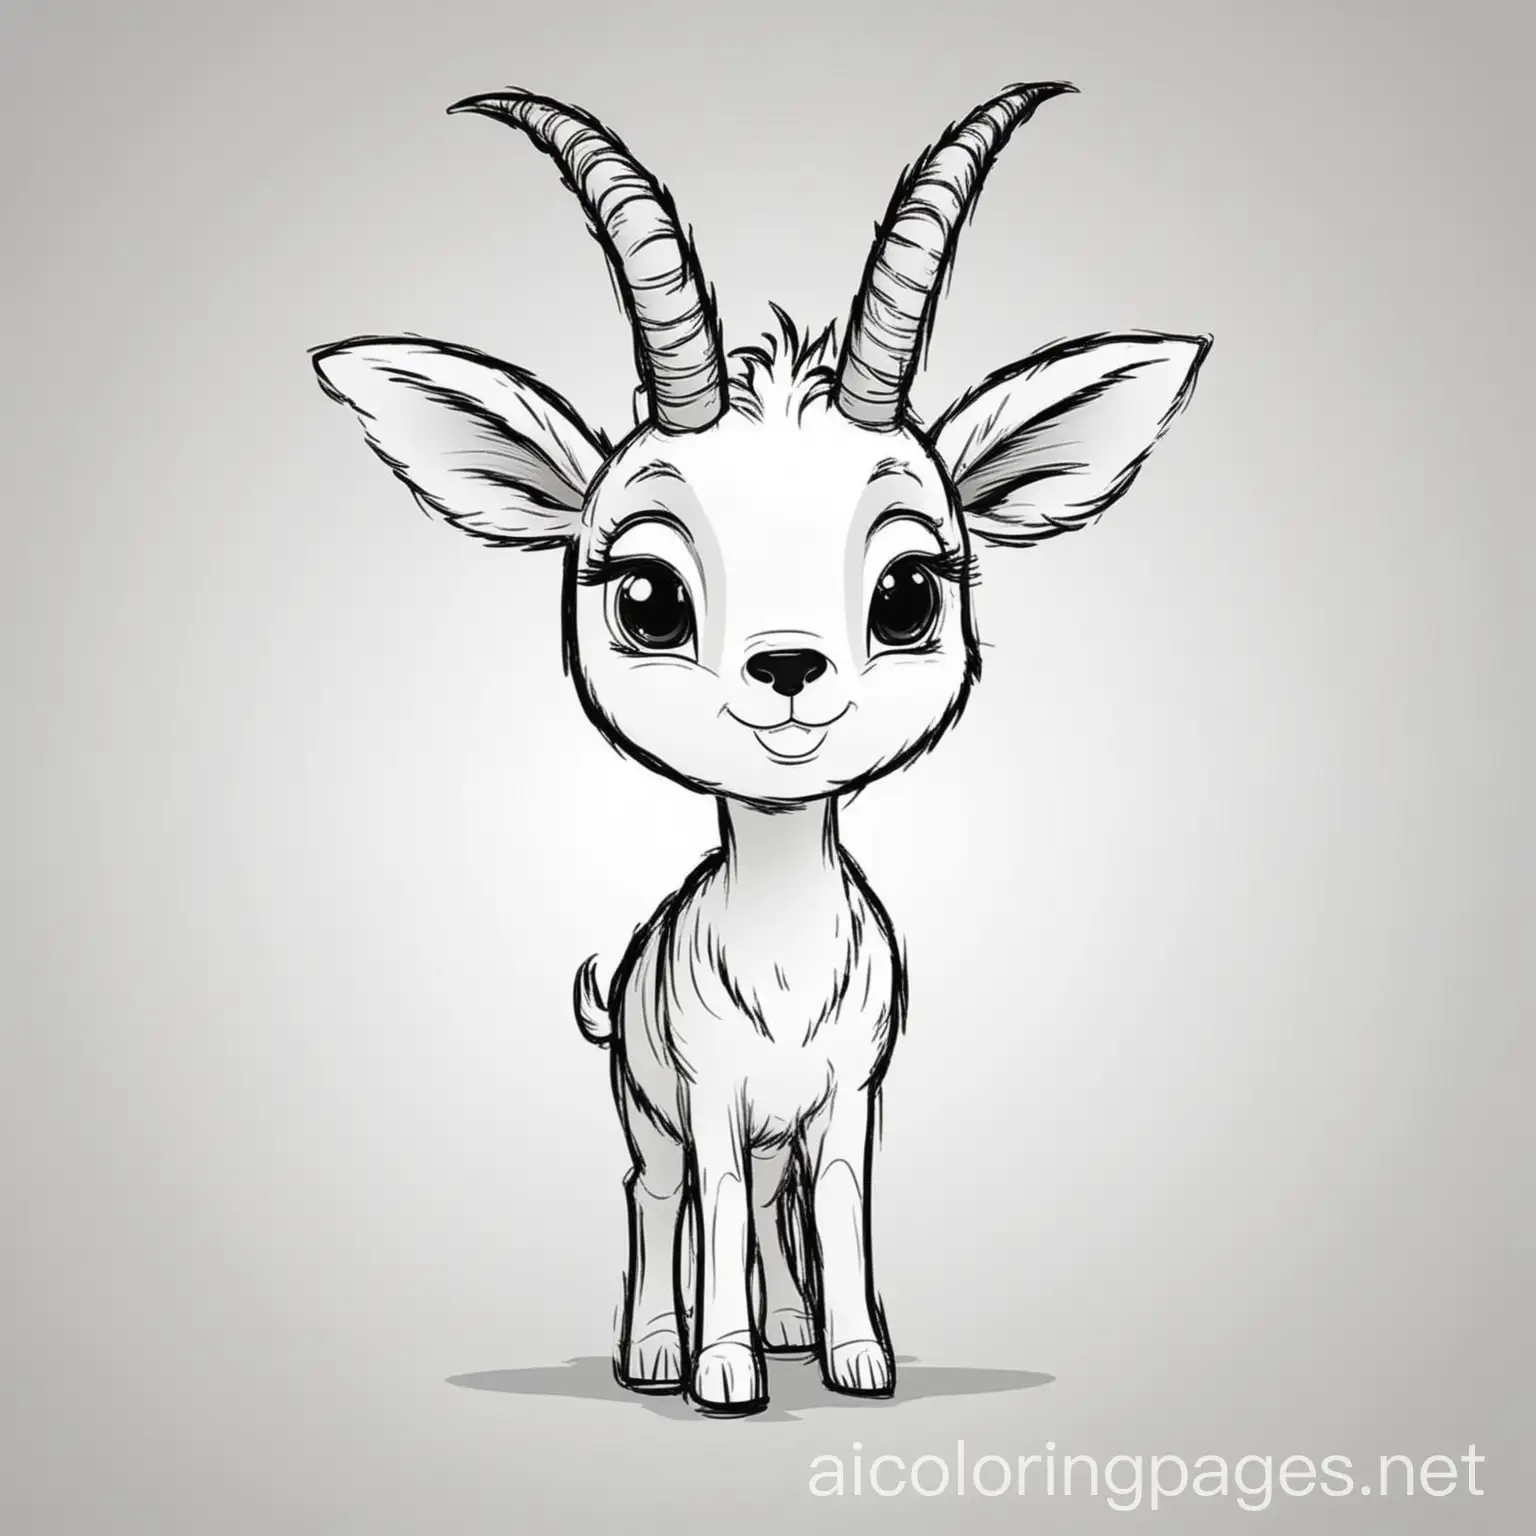 Antelope cartoon character, Coloring Page, black and white, line art, white background, Simplicity, Ample White Space. The background of the coloring page is plain white to make it easy for young children to color within the lines. The outlines of all the subjects are easy to distinguish, making it simple for kids to color without too much difficulty